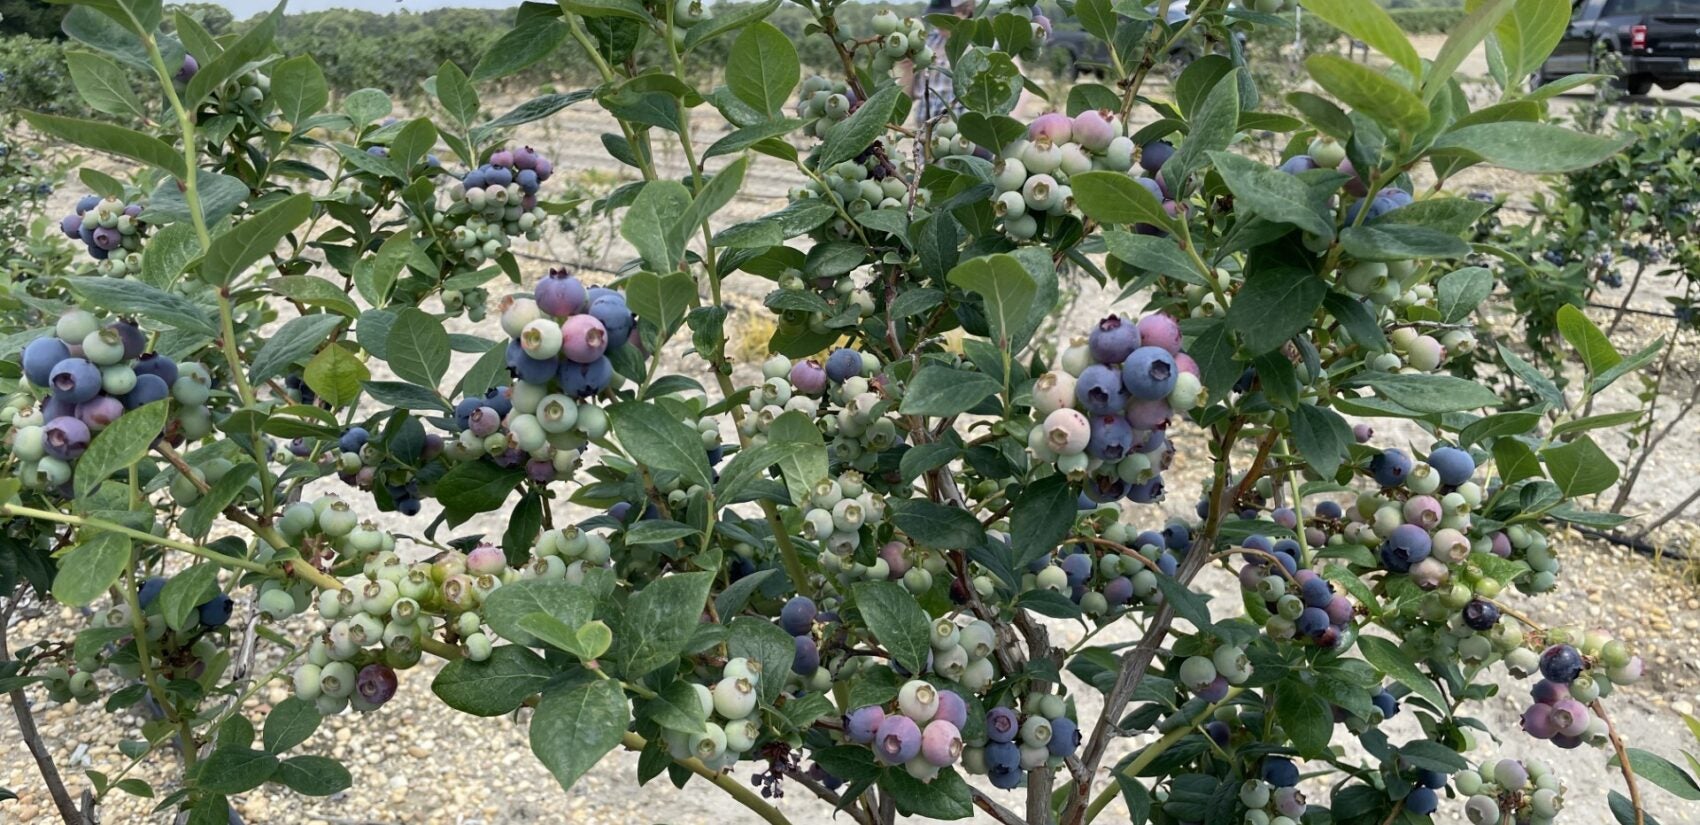 This is now the height of New Jersey blueberry season. (David Matthau/WHYY)